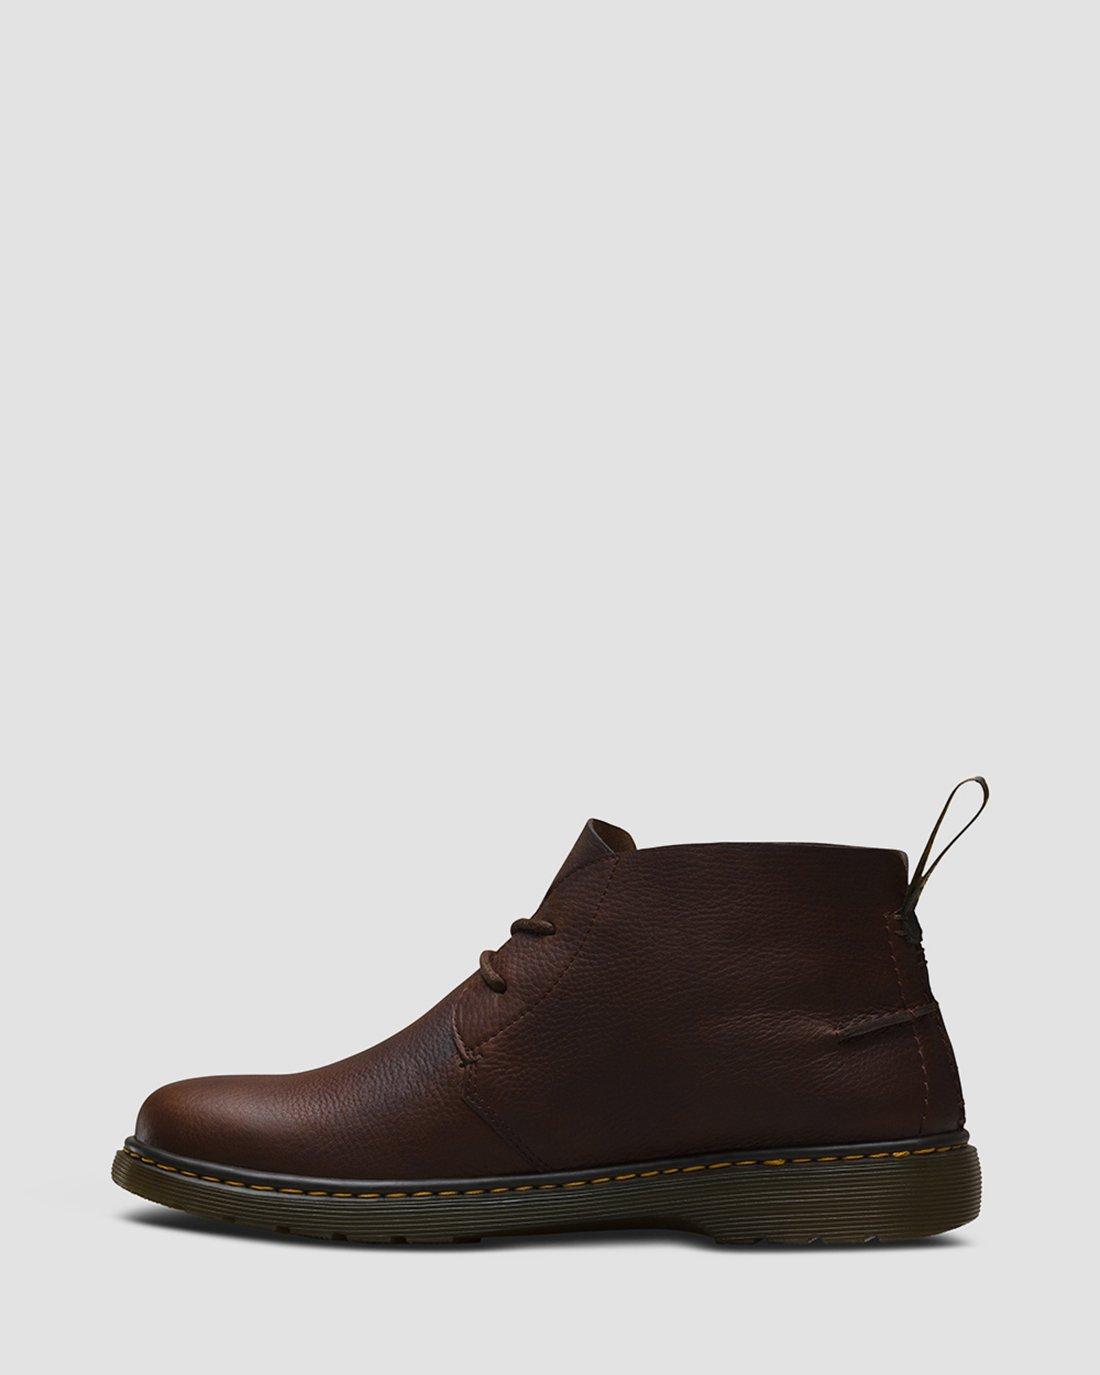 EMBER GRIZZLY | Dr. Martens